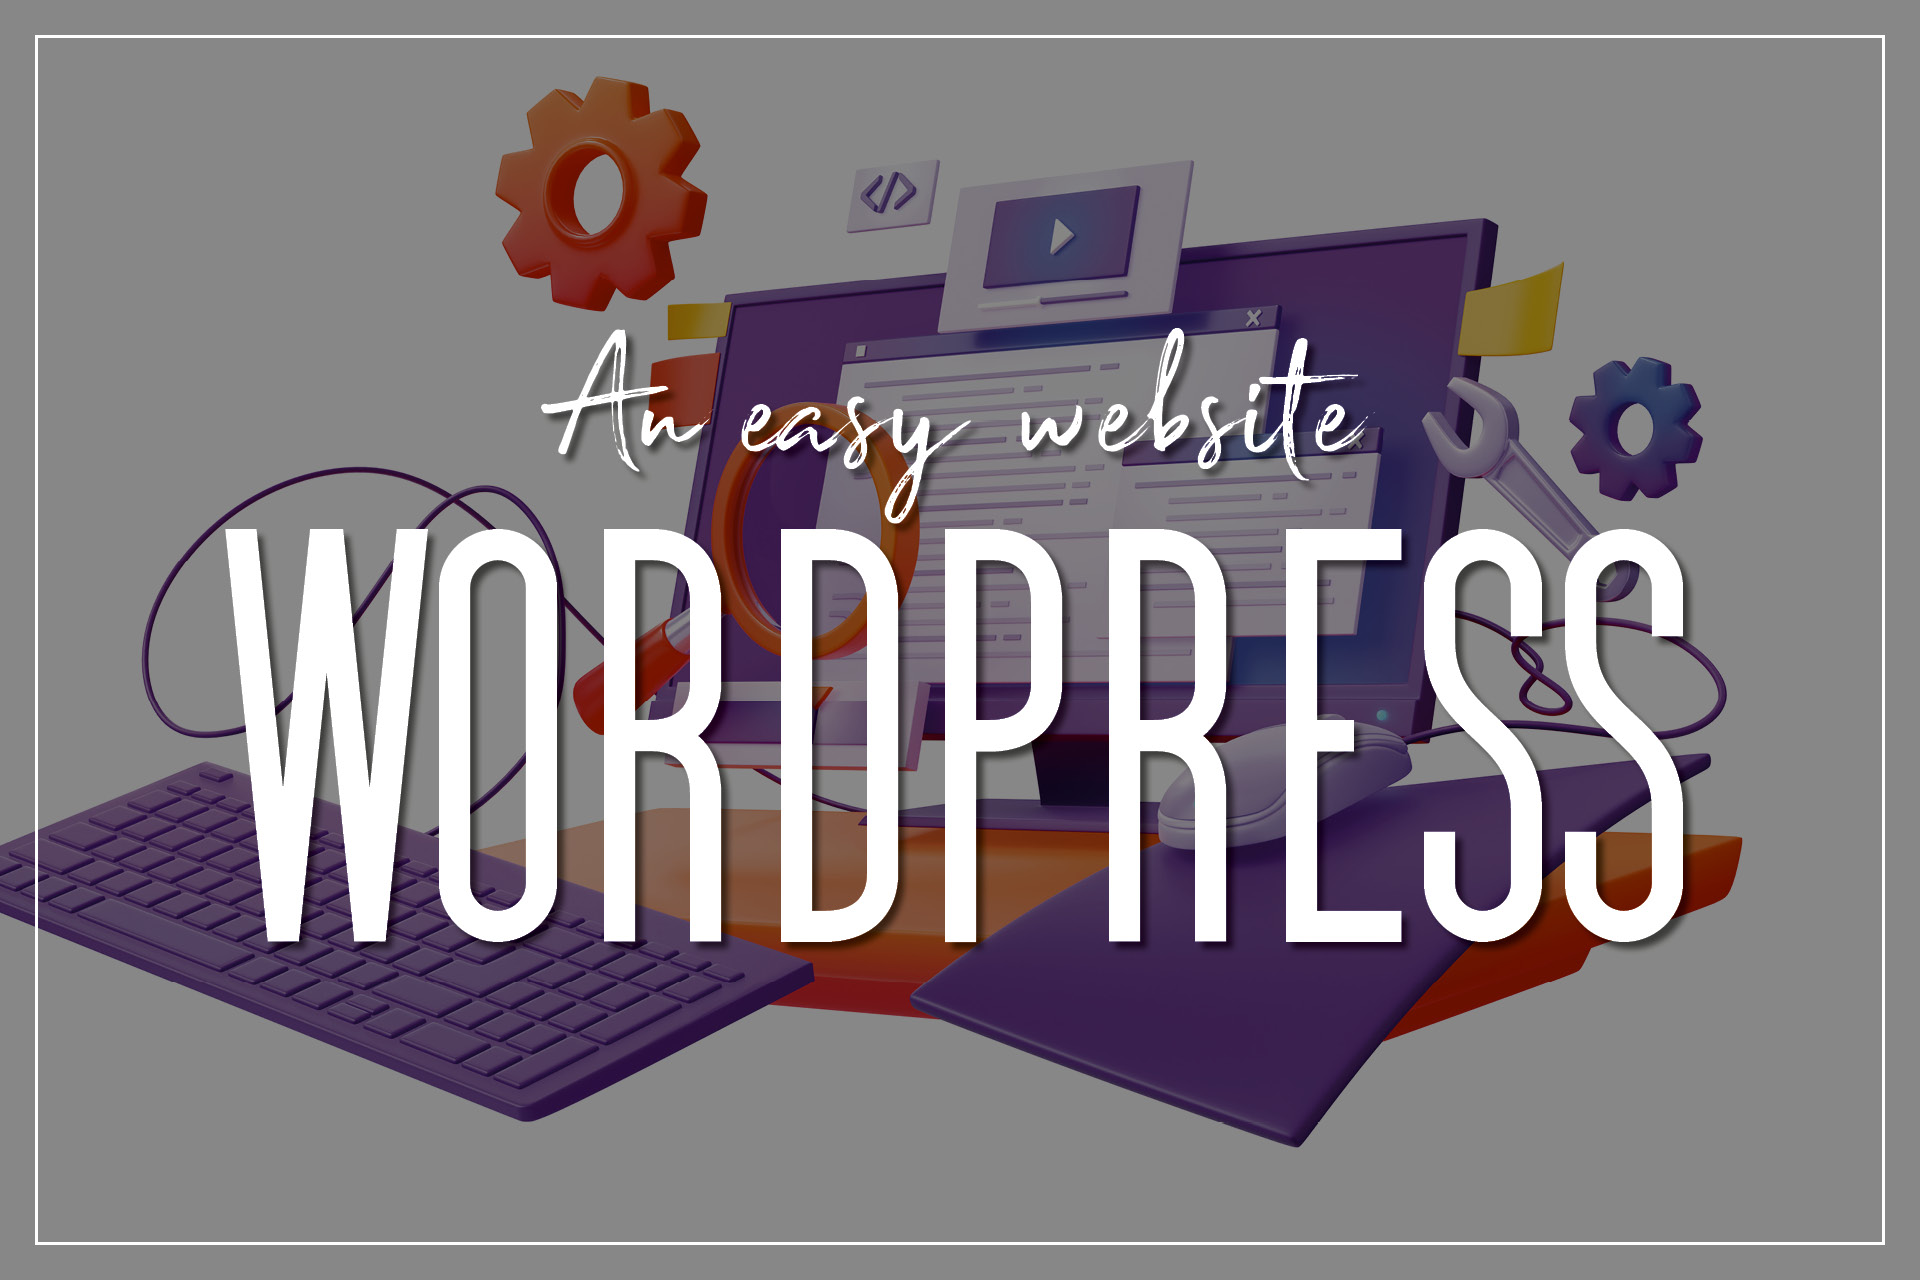 Wordpress: The Evolution of Websites - From Caveman Coding to Blogging Bliss!